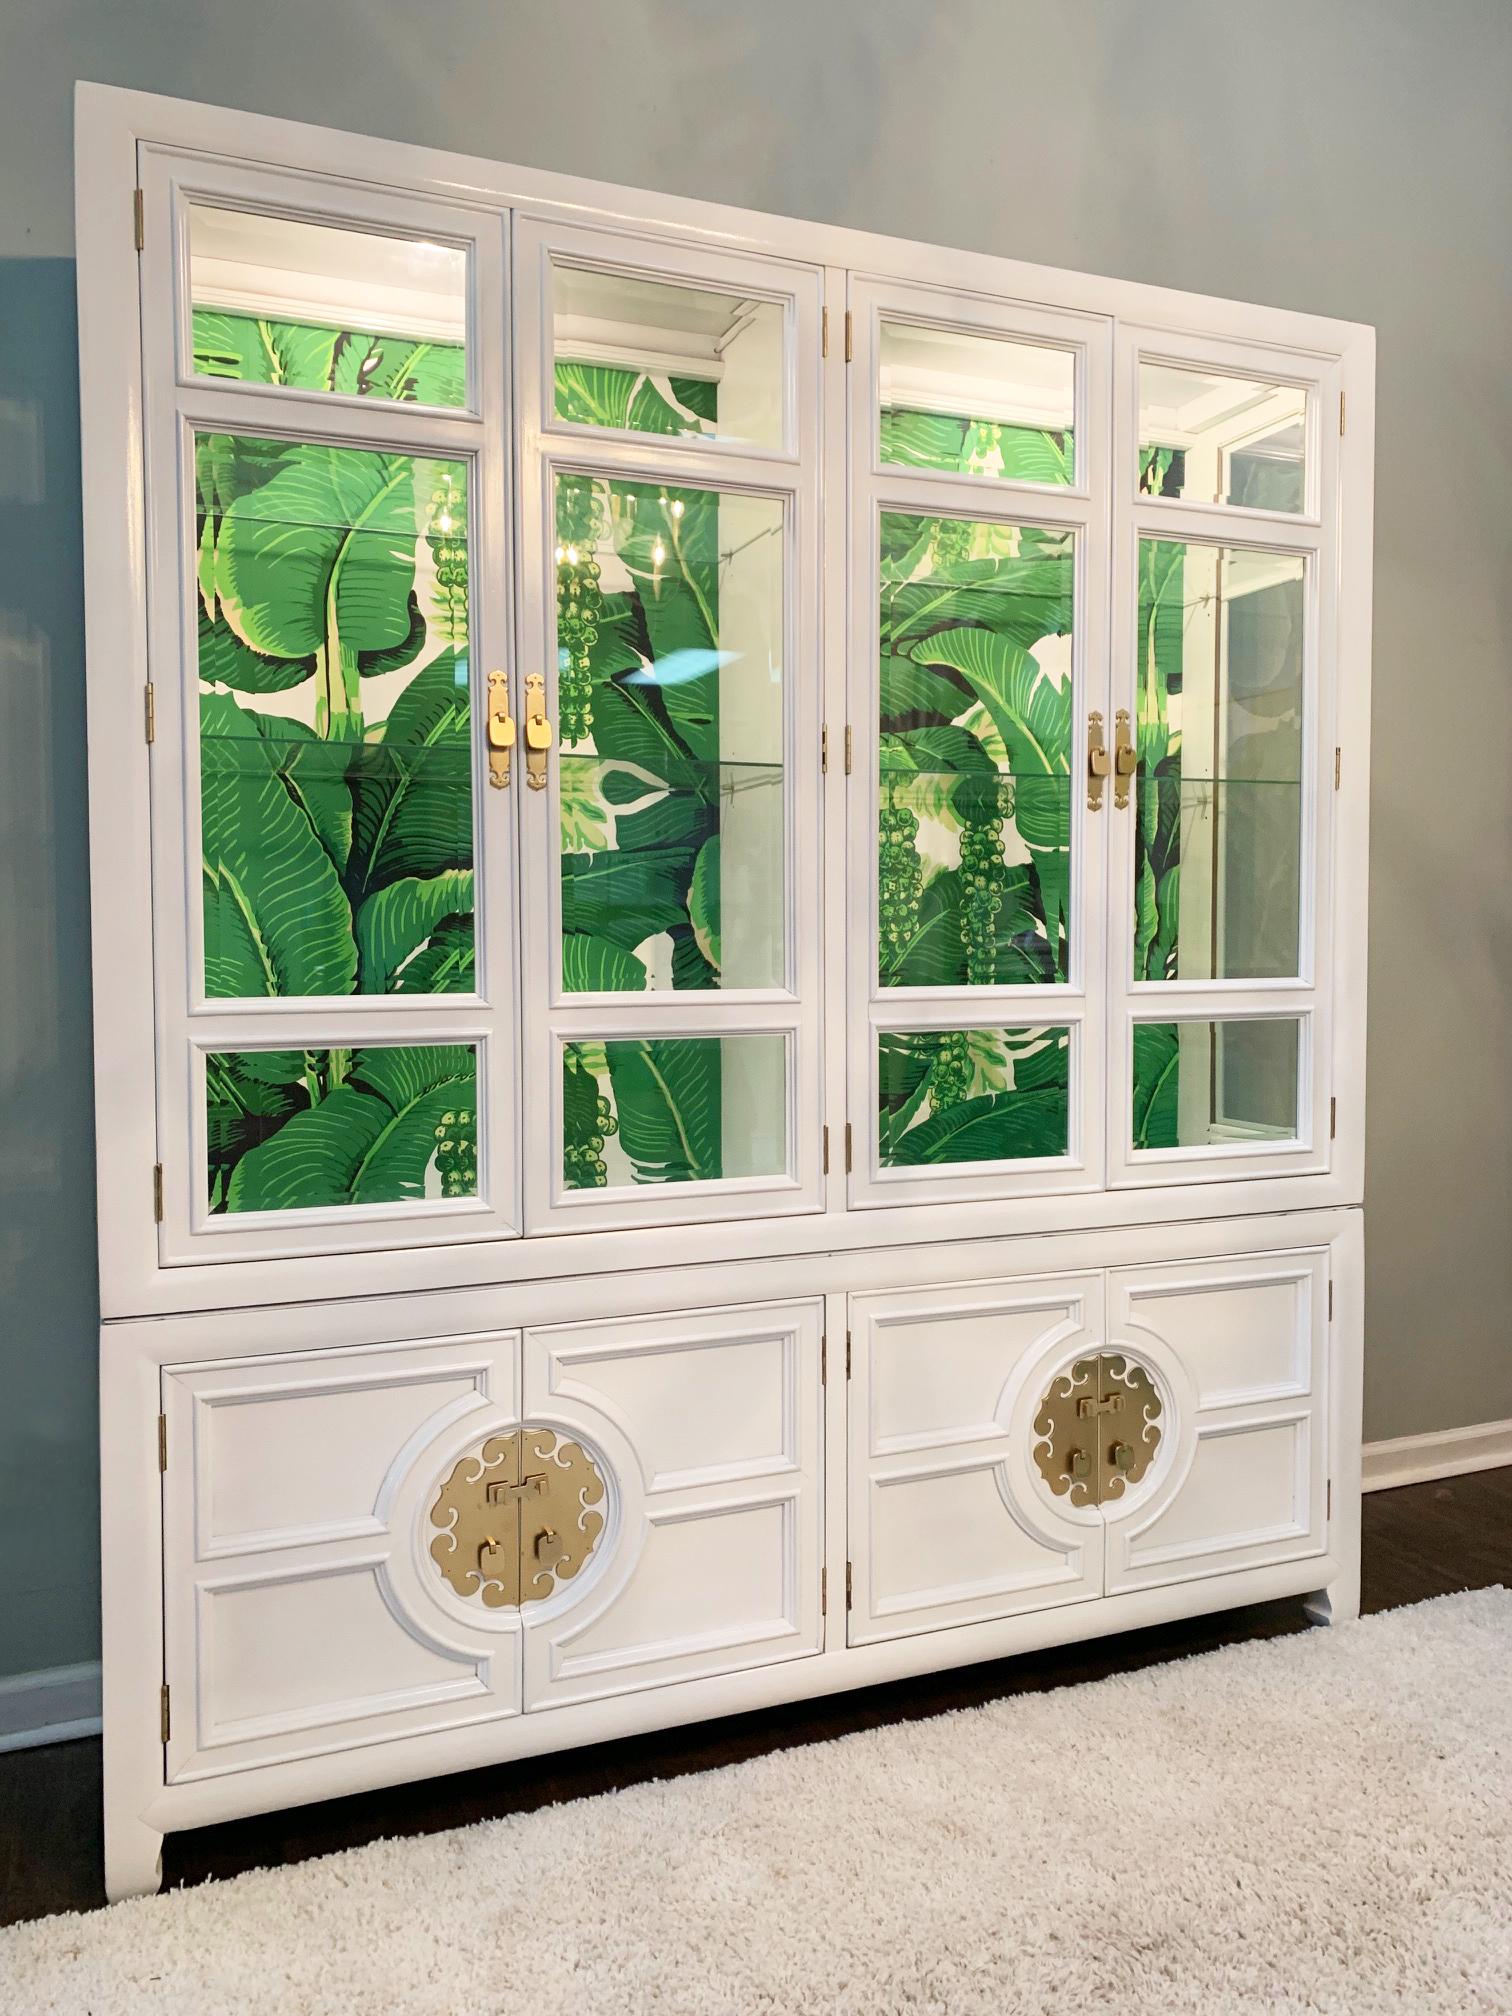 Large china cabinet by Century Furniture features new high gloss white lacquer finish, Dorothy Draper Brazilliance wallpaper detailing, and beveled glass doors. Lower cabinet sits on Ming styled legs and houses three drawers and shelving for